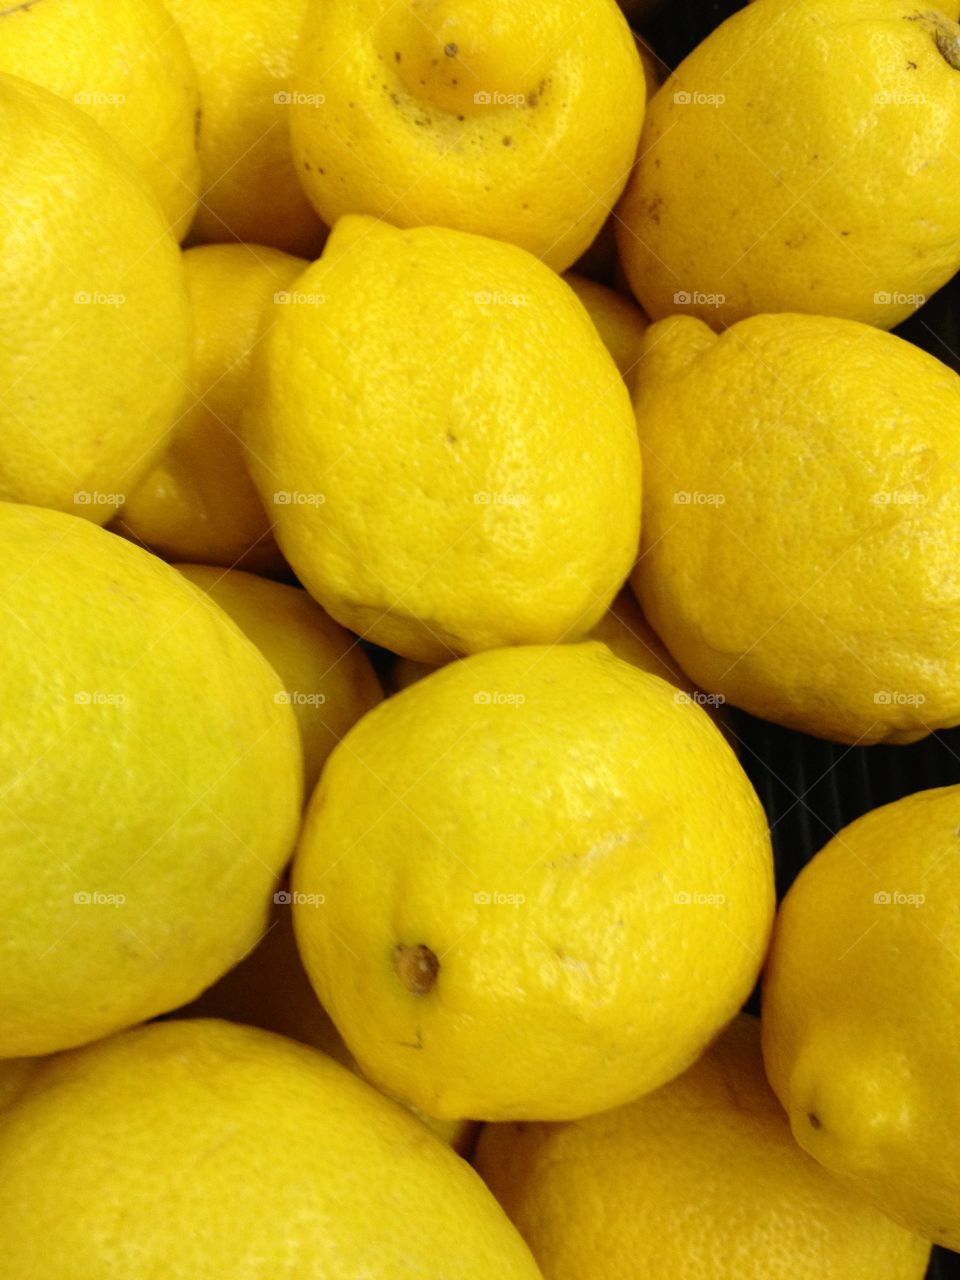 Life will give you lemons in a pile.